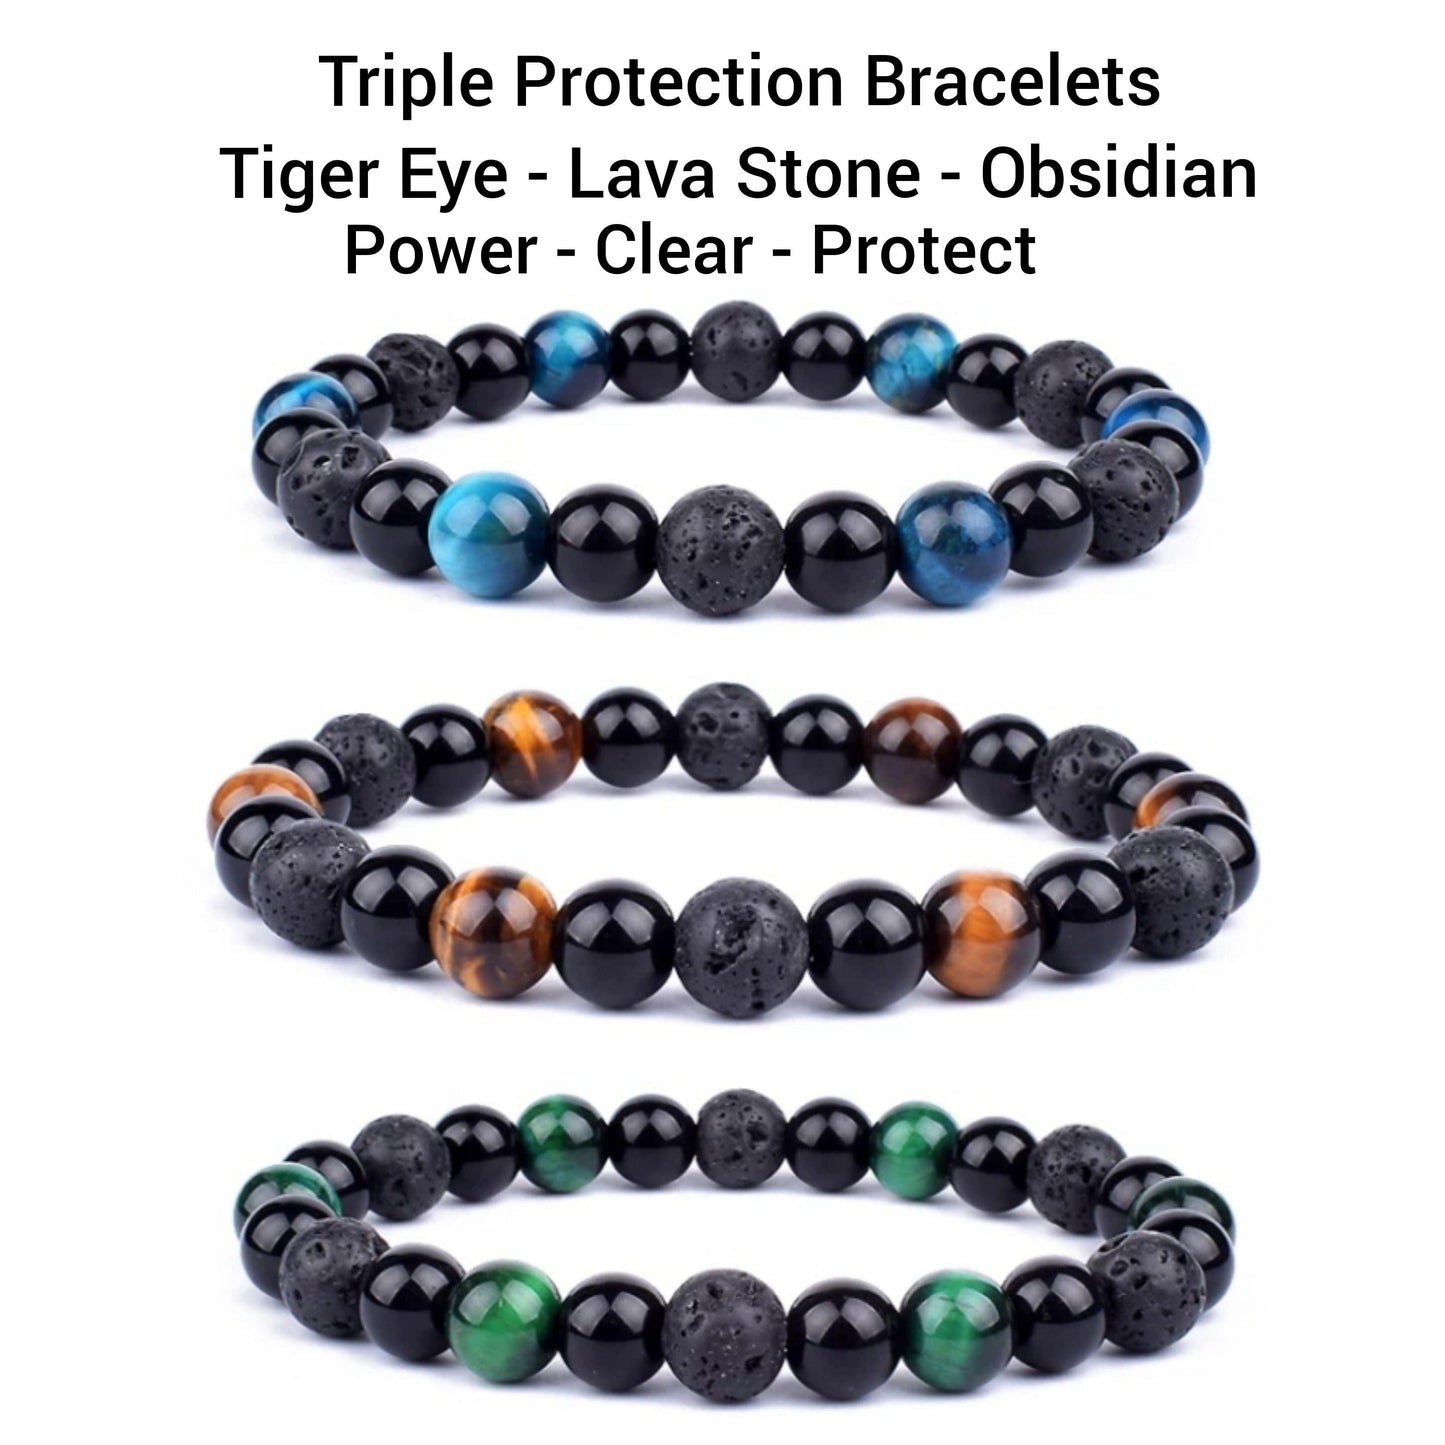 Triple Protection Bracelet Tiger Eye, Lava Stone, Black Obsidian Power-Clear-Protect 6mm beaded 8 inch Bracelet - Guiding Lights Boutique